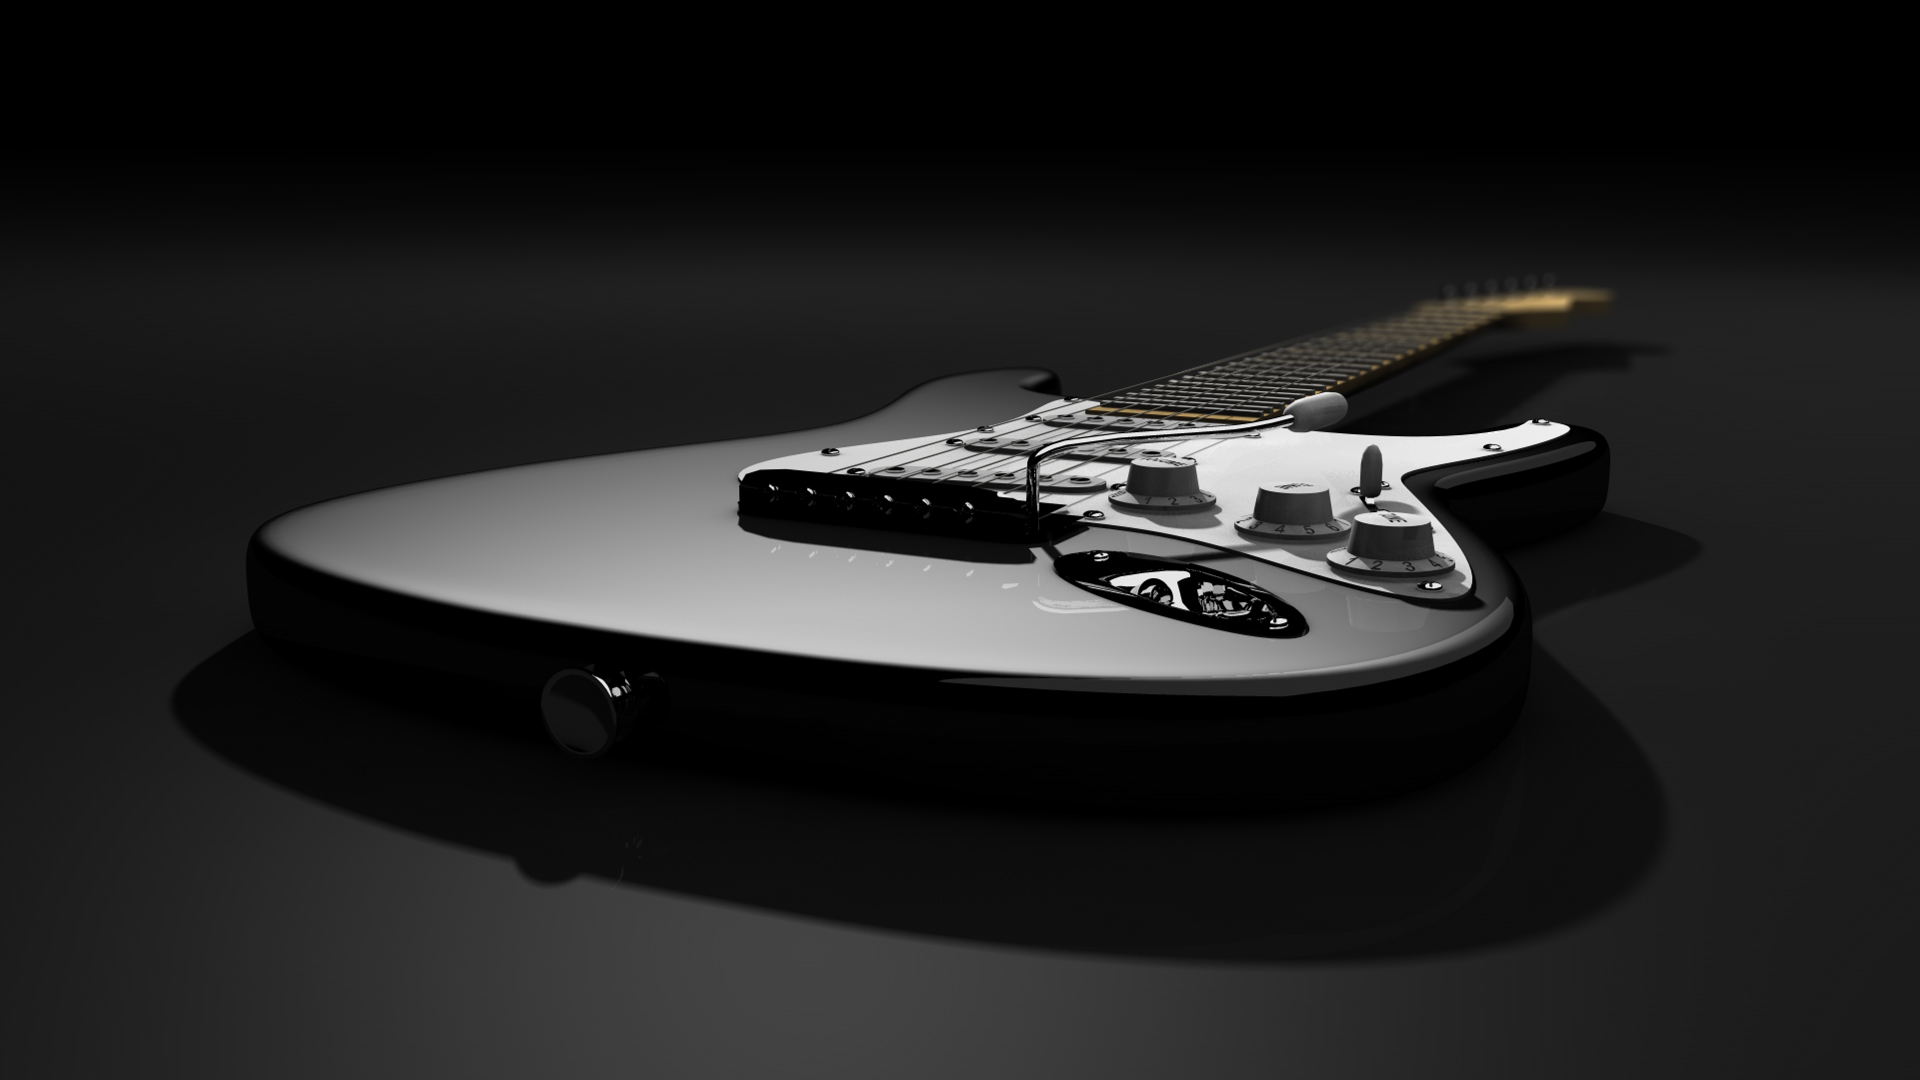 Fender Stratocaster Wallpaper You Are Ing The Abstract